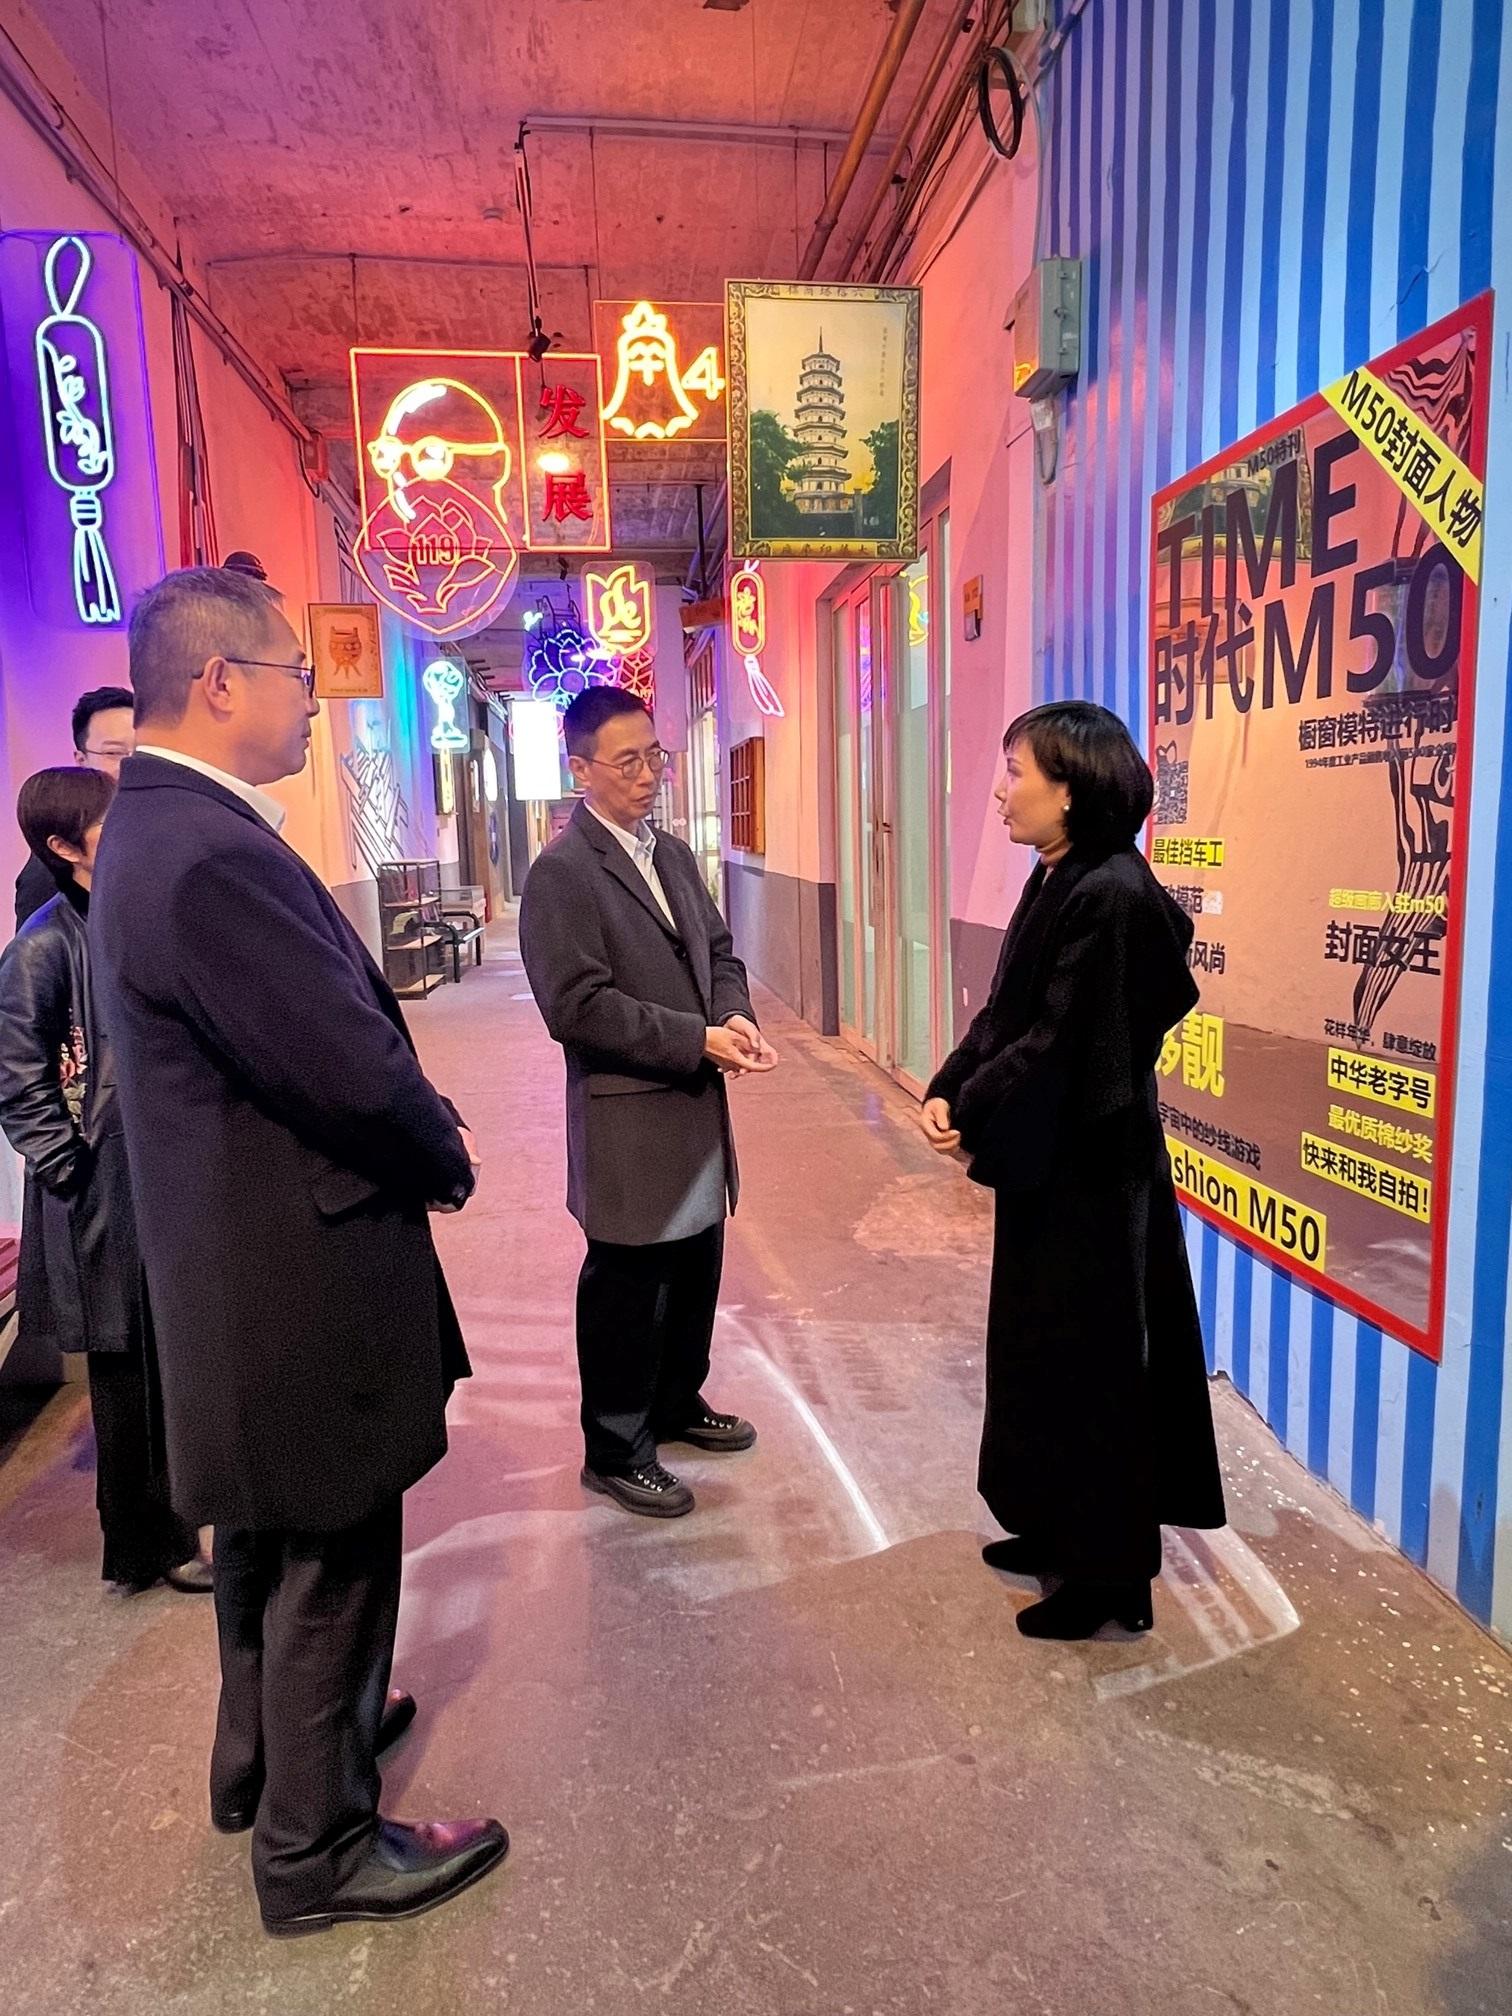 The Secretary for Culture, Sports and Tourism, Mr Kevin Yeung (centre), today (January 9) visited M50, which was a textile factory compound in Shanghai. The Permanent Secretary for Culture, Sports and Tourism, Mr Joe Wong (left), was also present.